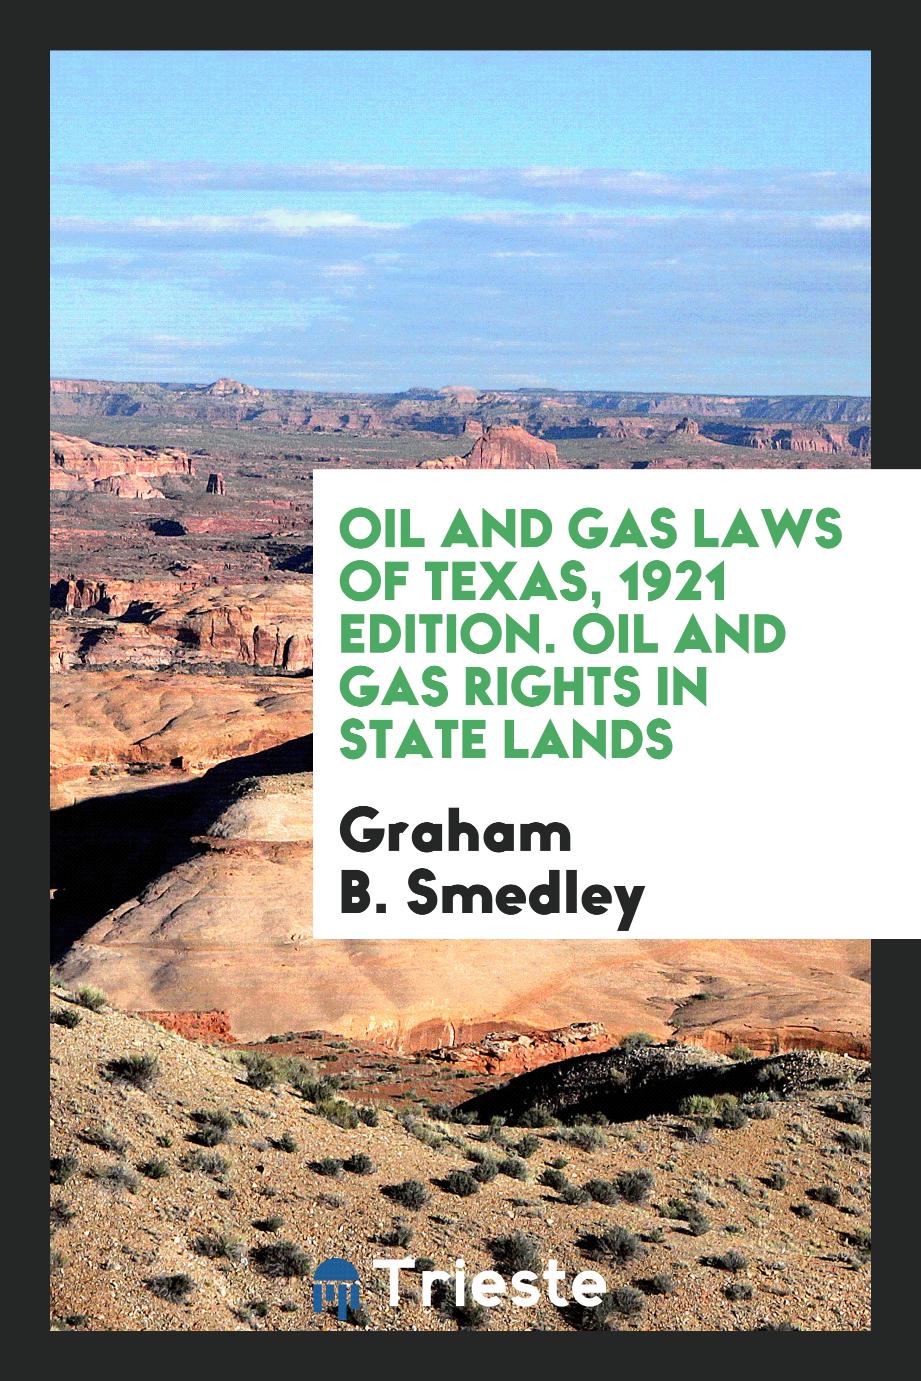 Oil and Gas Laws of Texas, 1921 Edition. Oil and Gas Rights in State Lands